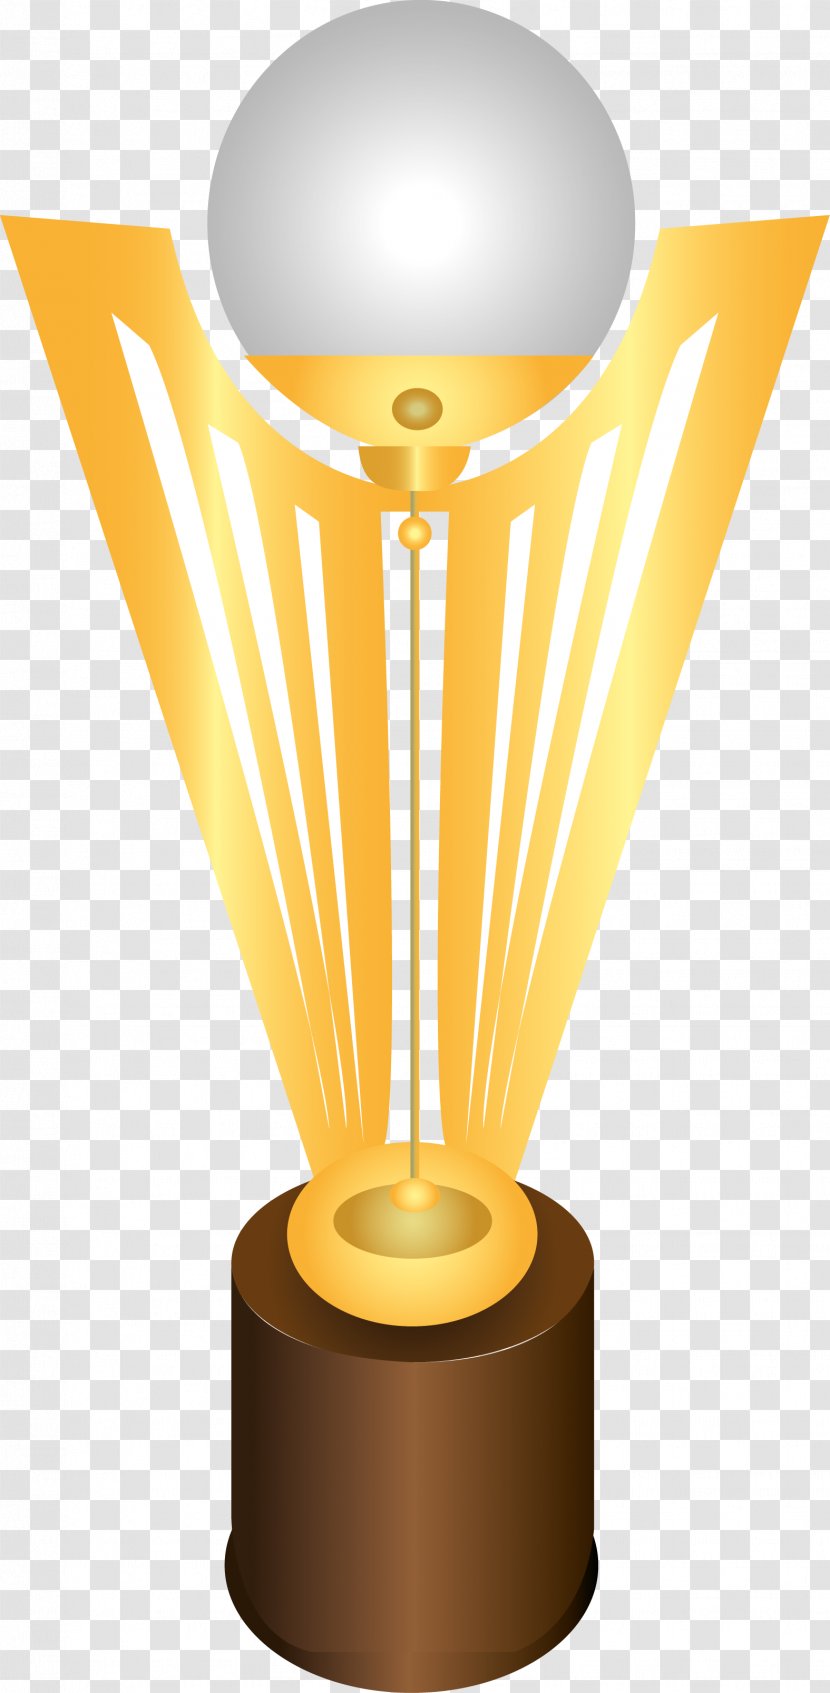 2011 Copa Centroamericana 2017 2007 UNCAF Nations Cup 2013 1991 - Central American Football Union - Trophy Transparent PNG